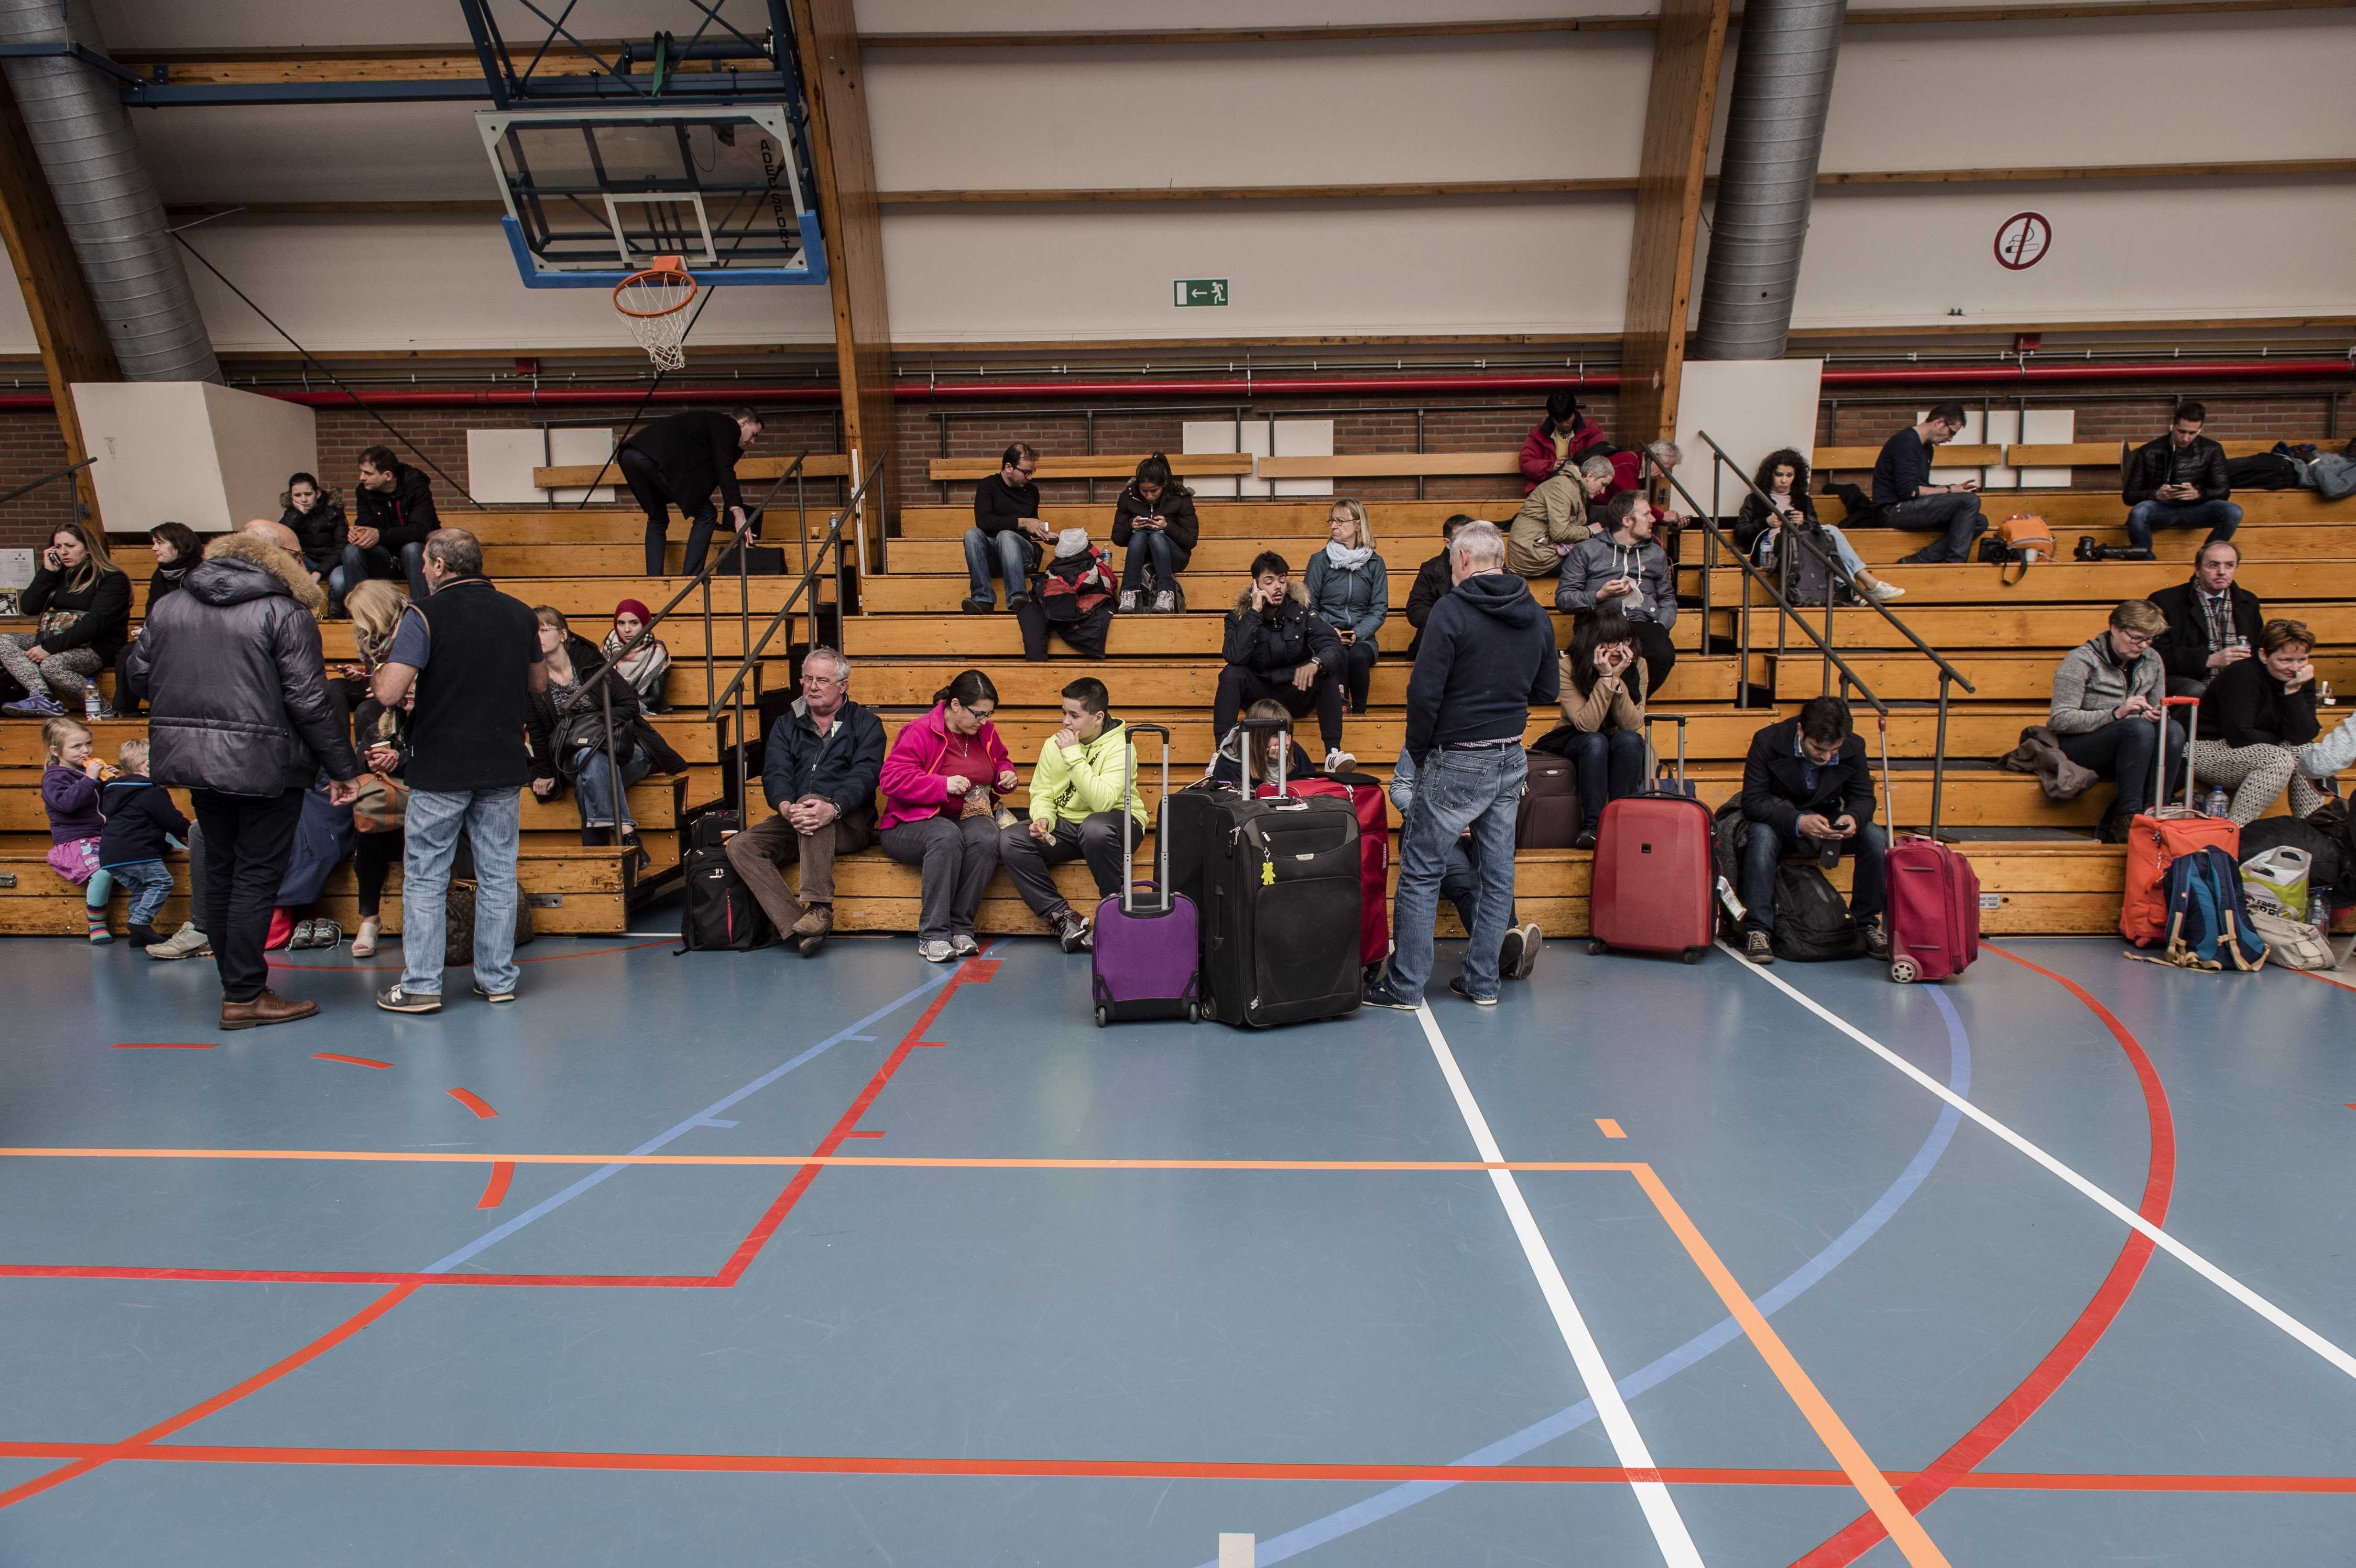 ASSEMBLED. Travellers are assembled at a sports hall in Zaventem in Brussels, Belgium, March 22, 2016. Photo by Jonas Roosens/EPA  